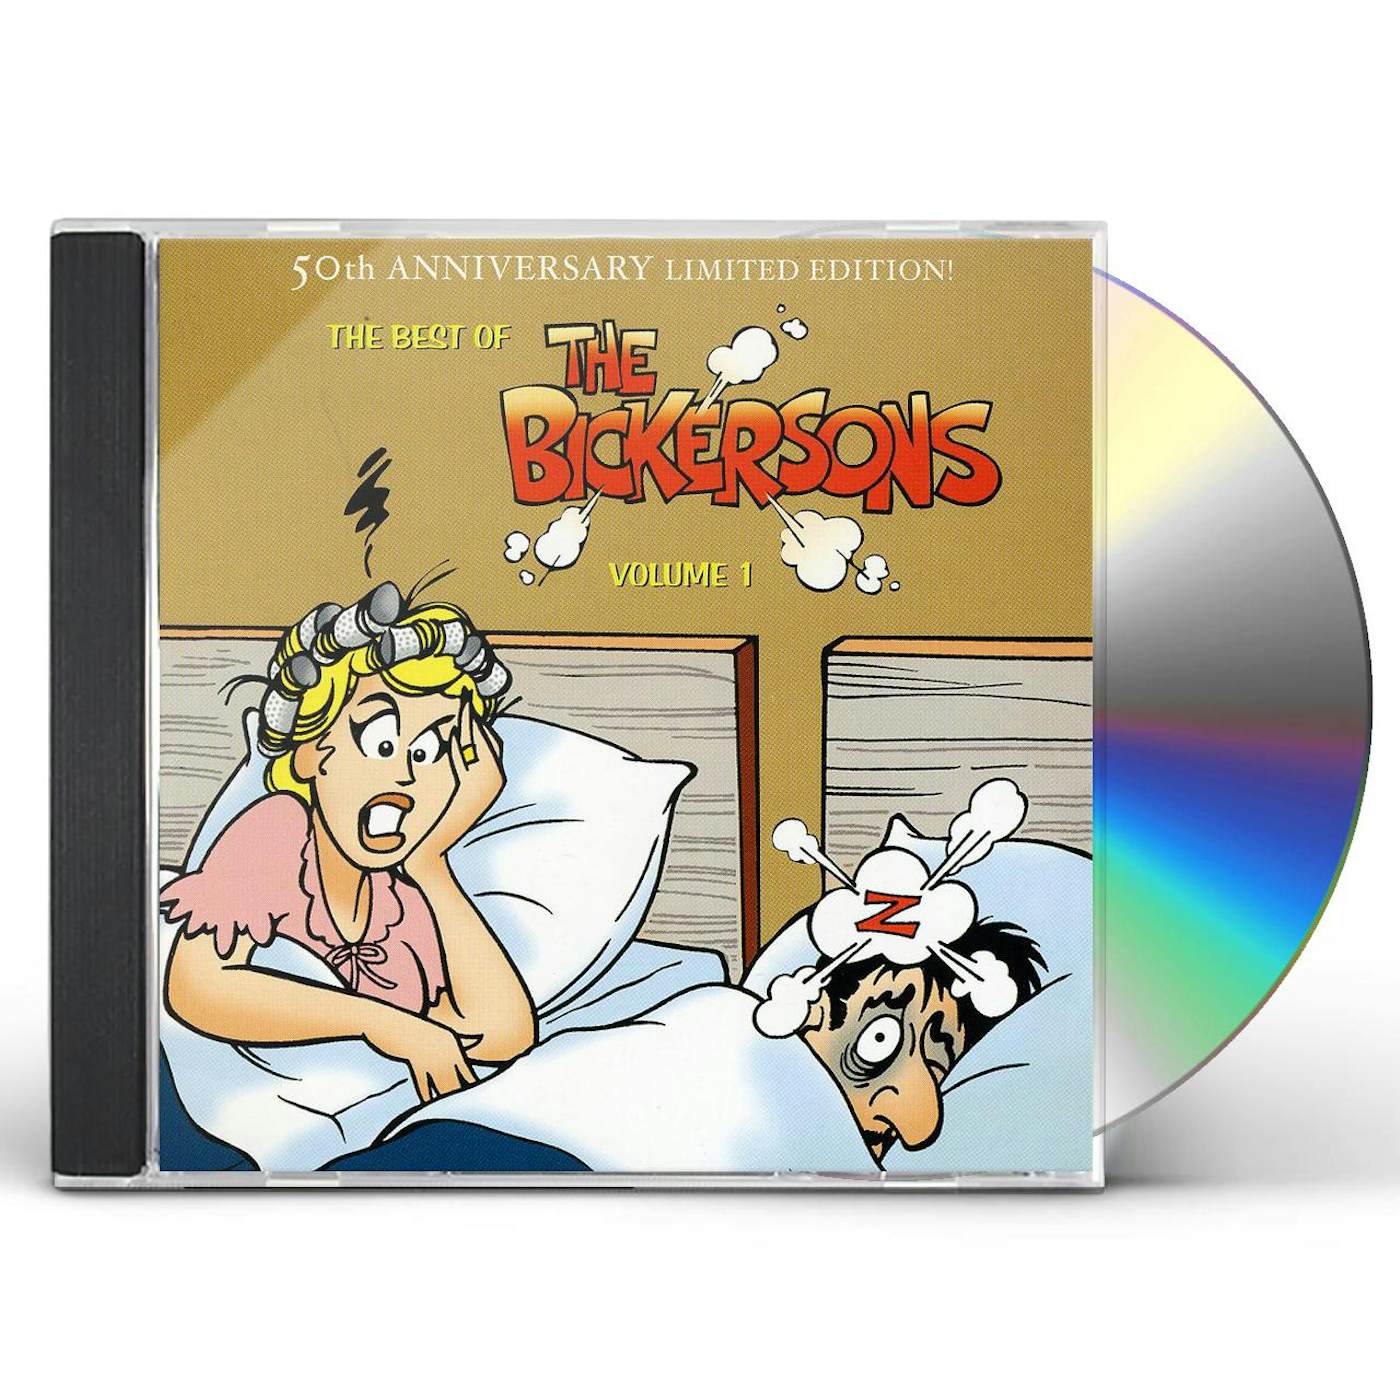 The Bickersons 50TH ANNIVERSARY LIMITED EDITION! VOL 1 CD